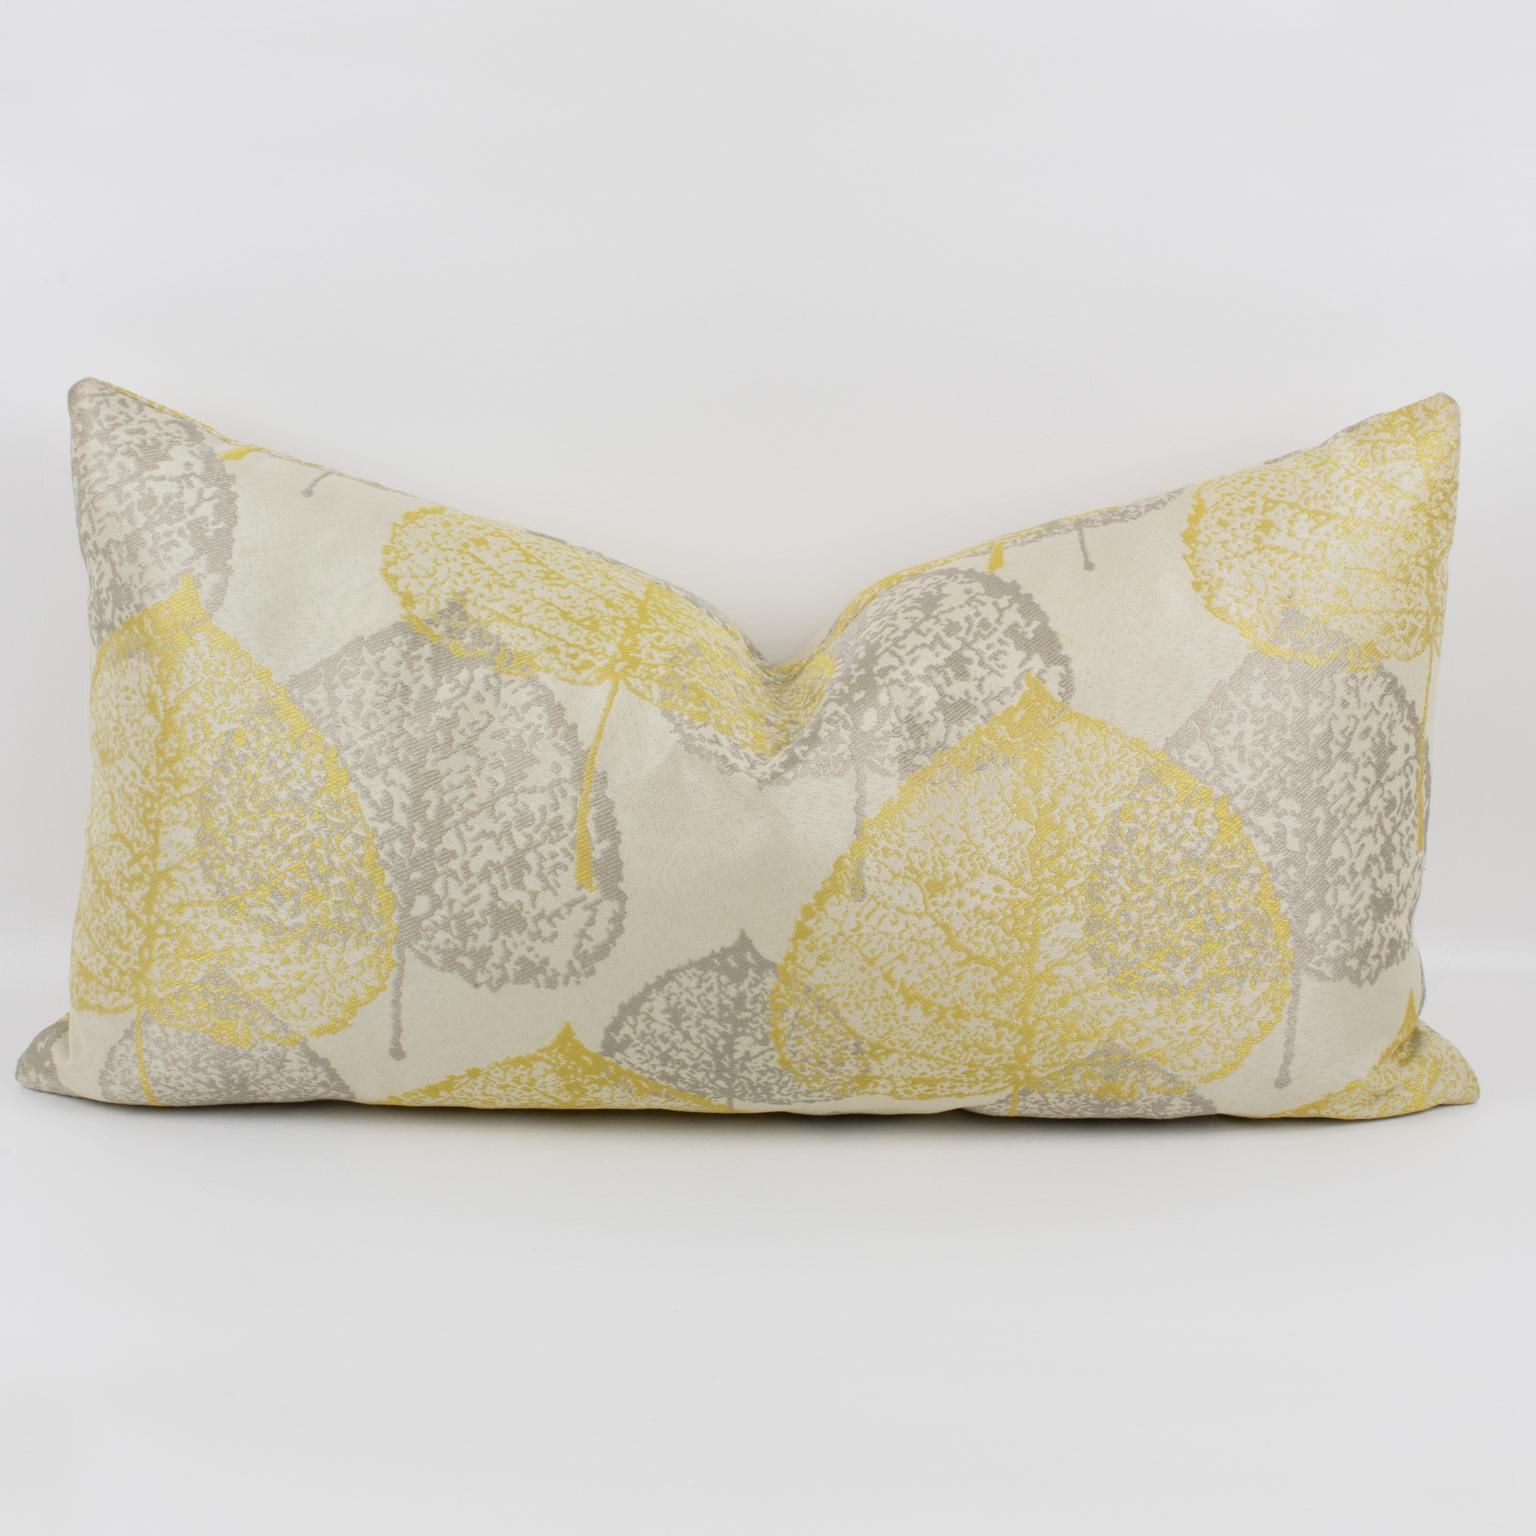 Silver Gray and Yellow Damask Throw Pillows, a pair In Excellent Condition For Sale In Atlanta, GA